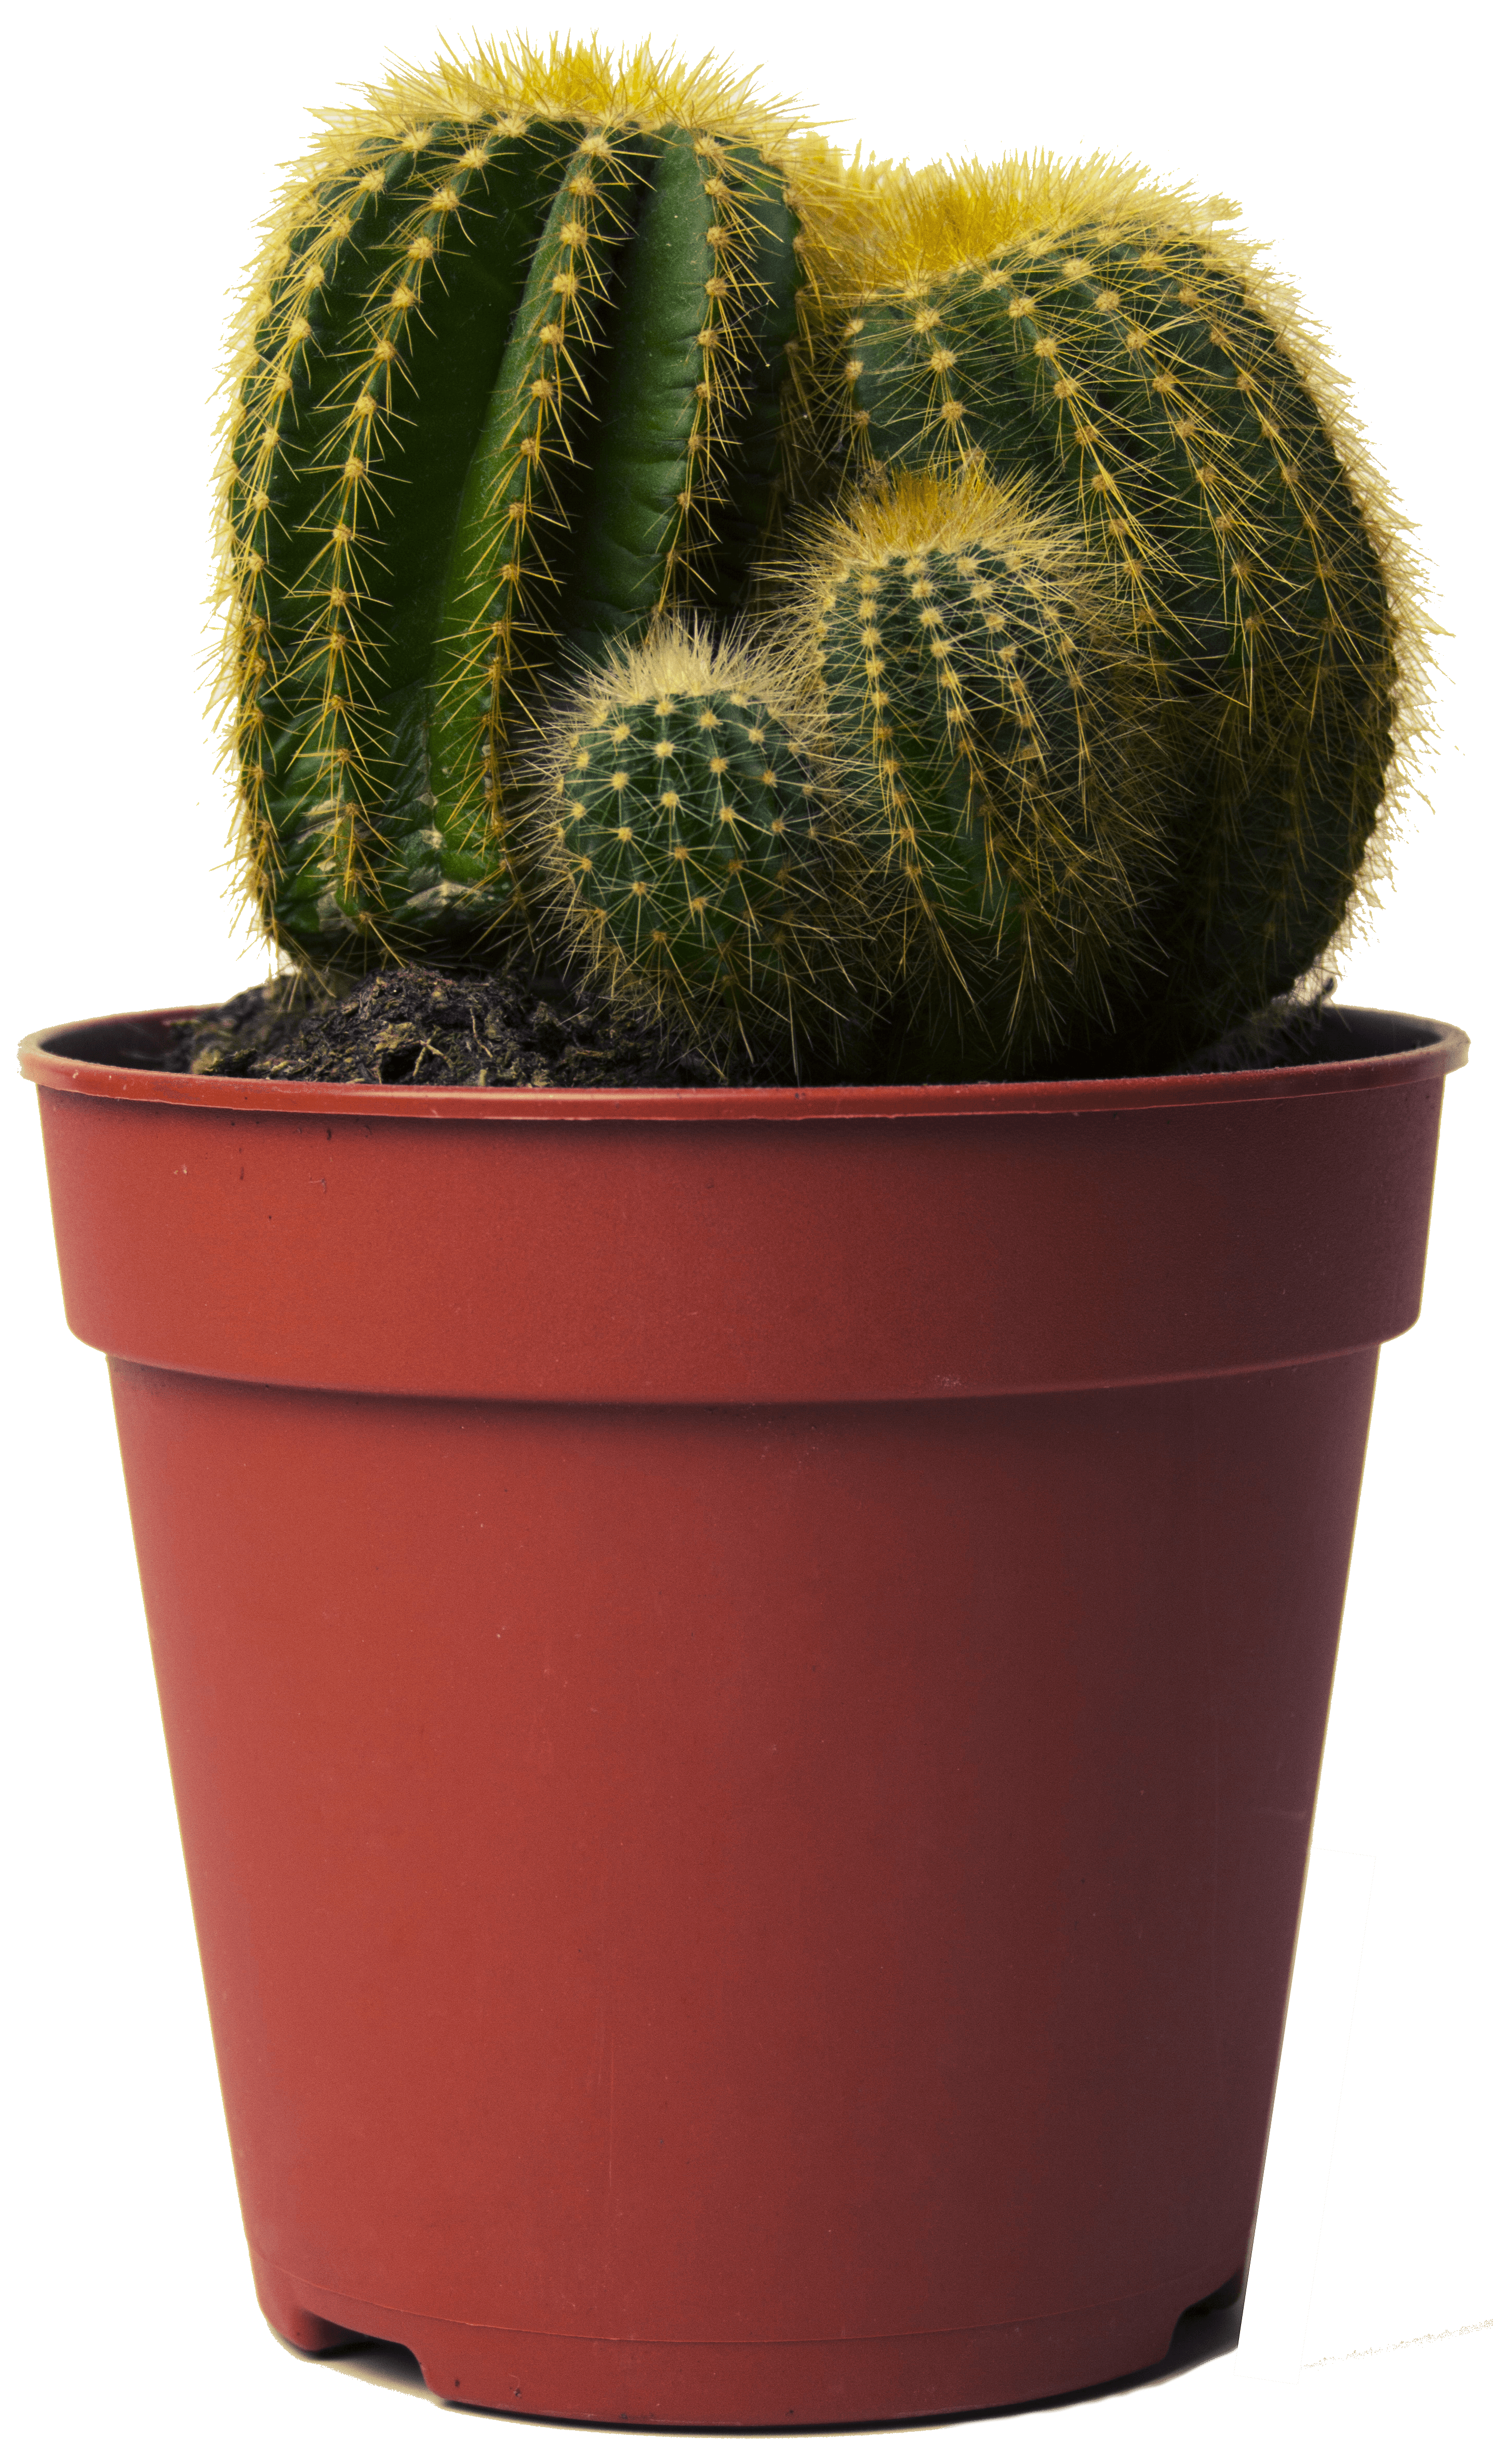 Tips & Advice] Growing Cacti | Sproutabl